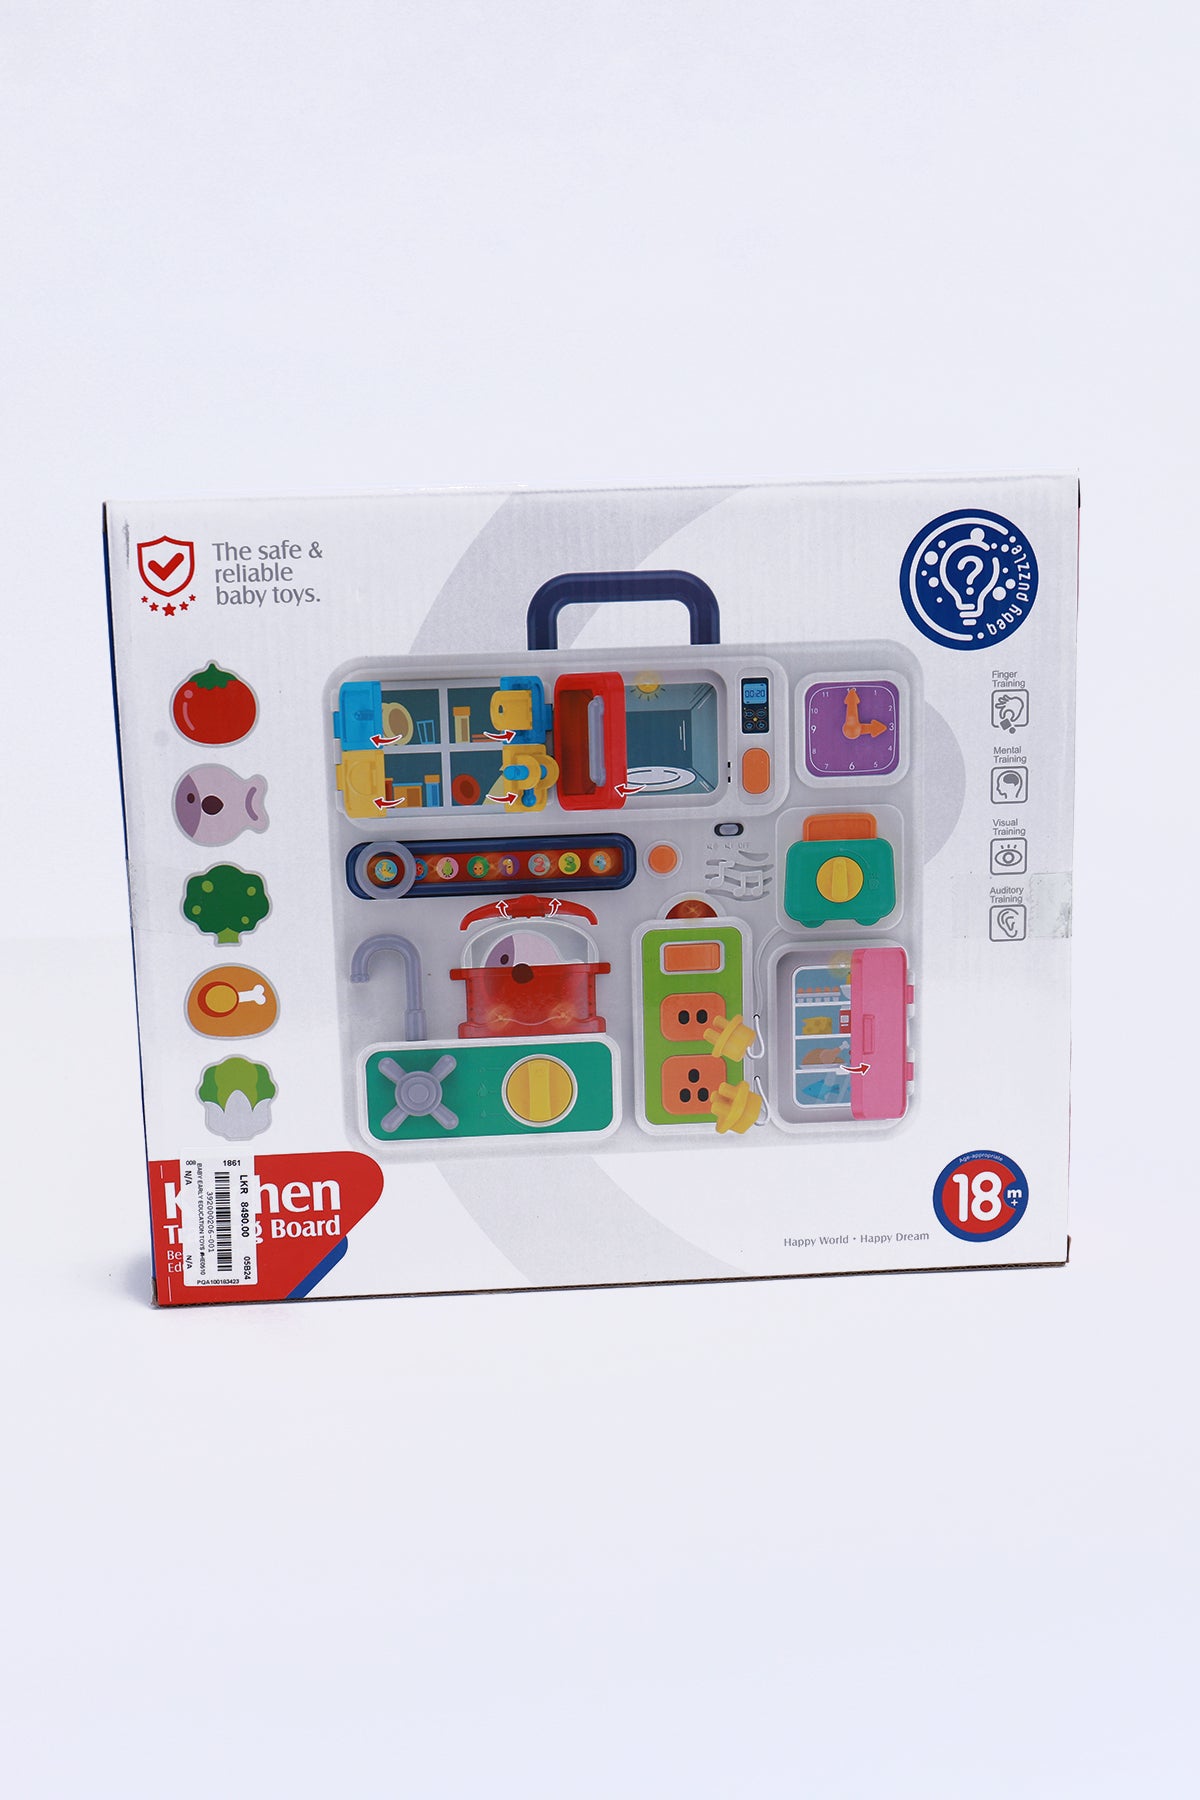 Baby Early Education Kitchen Training Board Toy